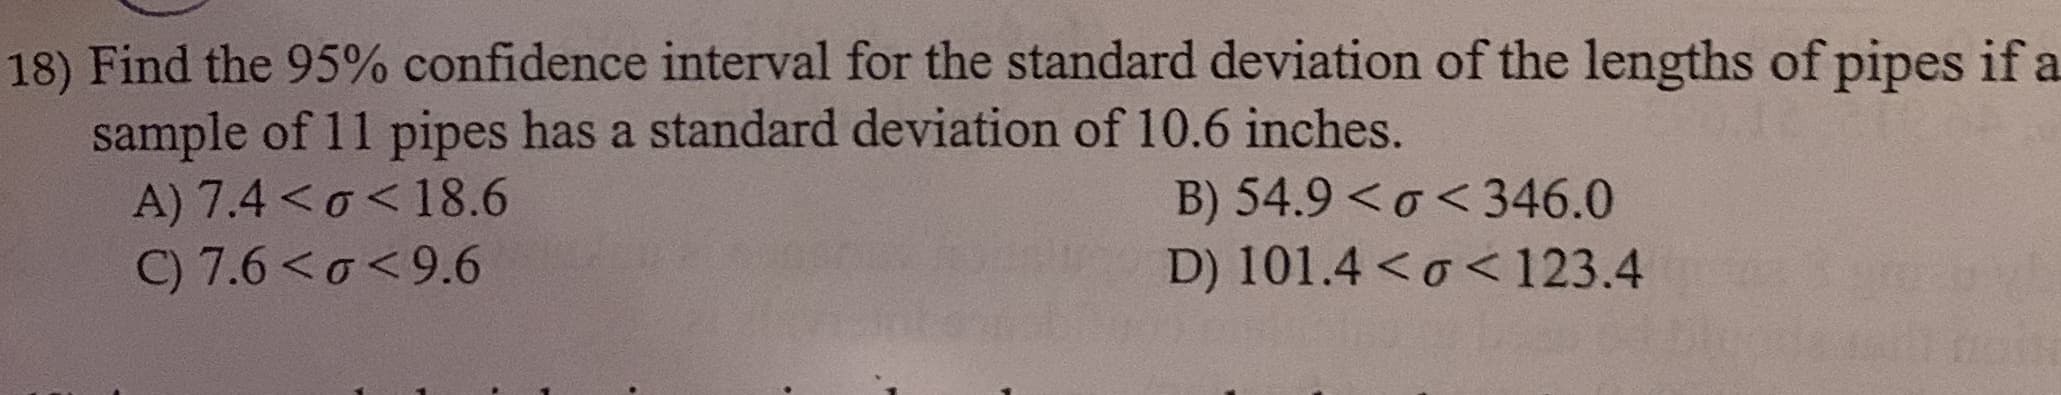 18) Find the 95% confidence interval for the standard deviation of the lengths of pipes if a
sample of 11 pipes has a standard deviation of 10.6 inches.
A) 7.4< 0<18.6
C) 7.6 <a<9.6
B) 54.9 < o<346.0
D) 101.4 < o<123.4
0100H
